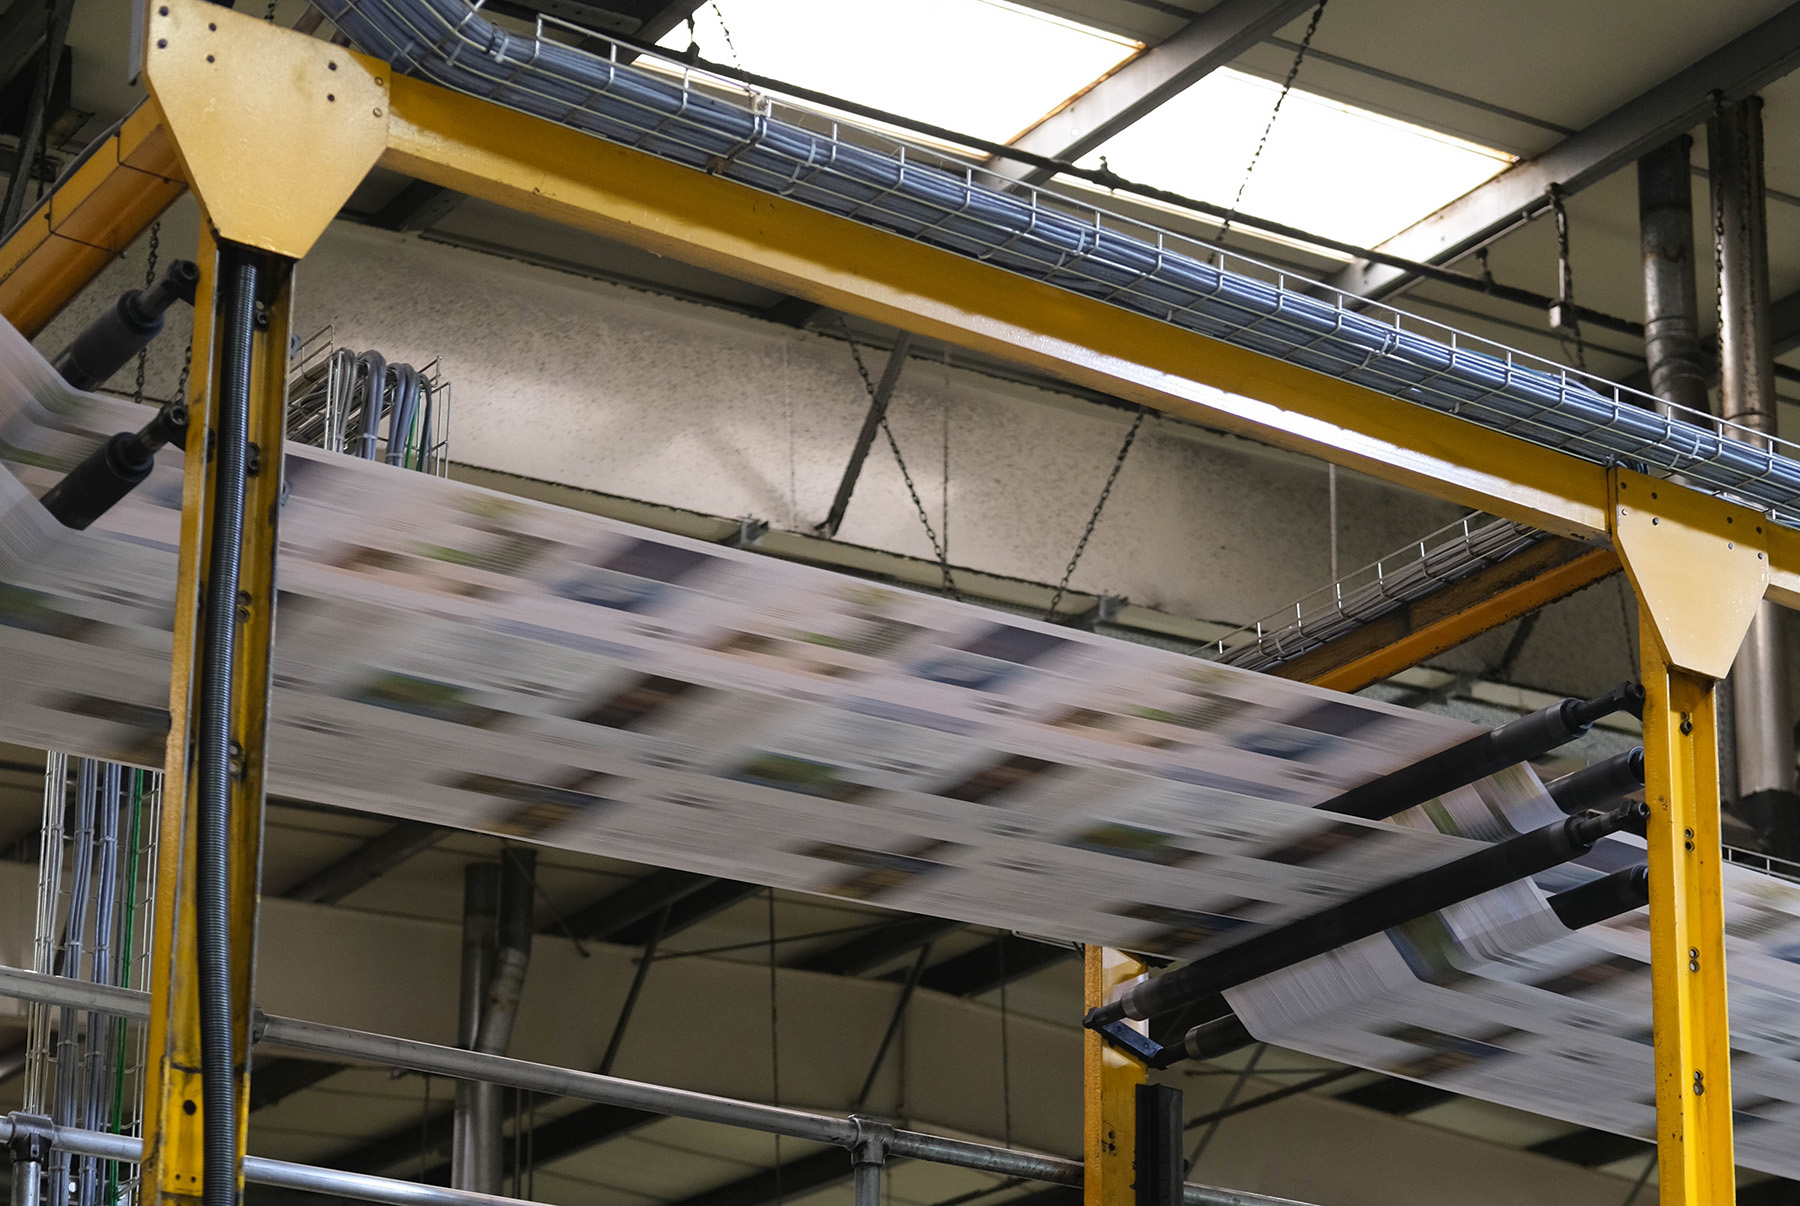 Freshly printed newspaper quickly advances through our large, traditional printing press.